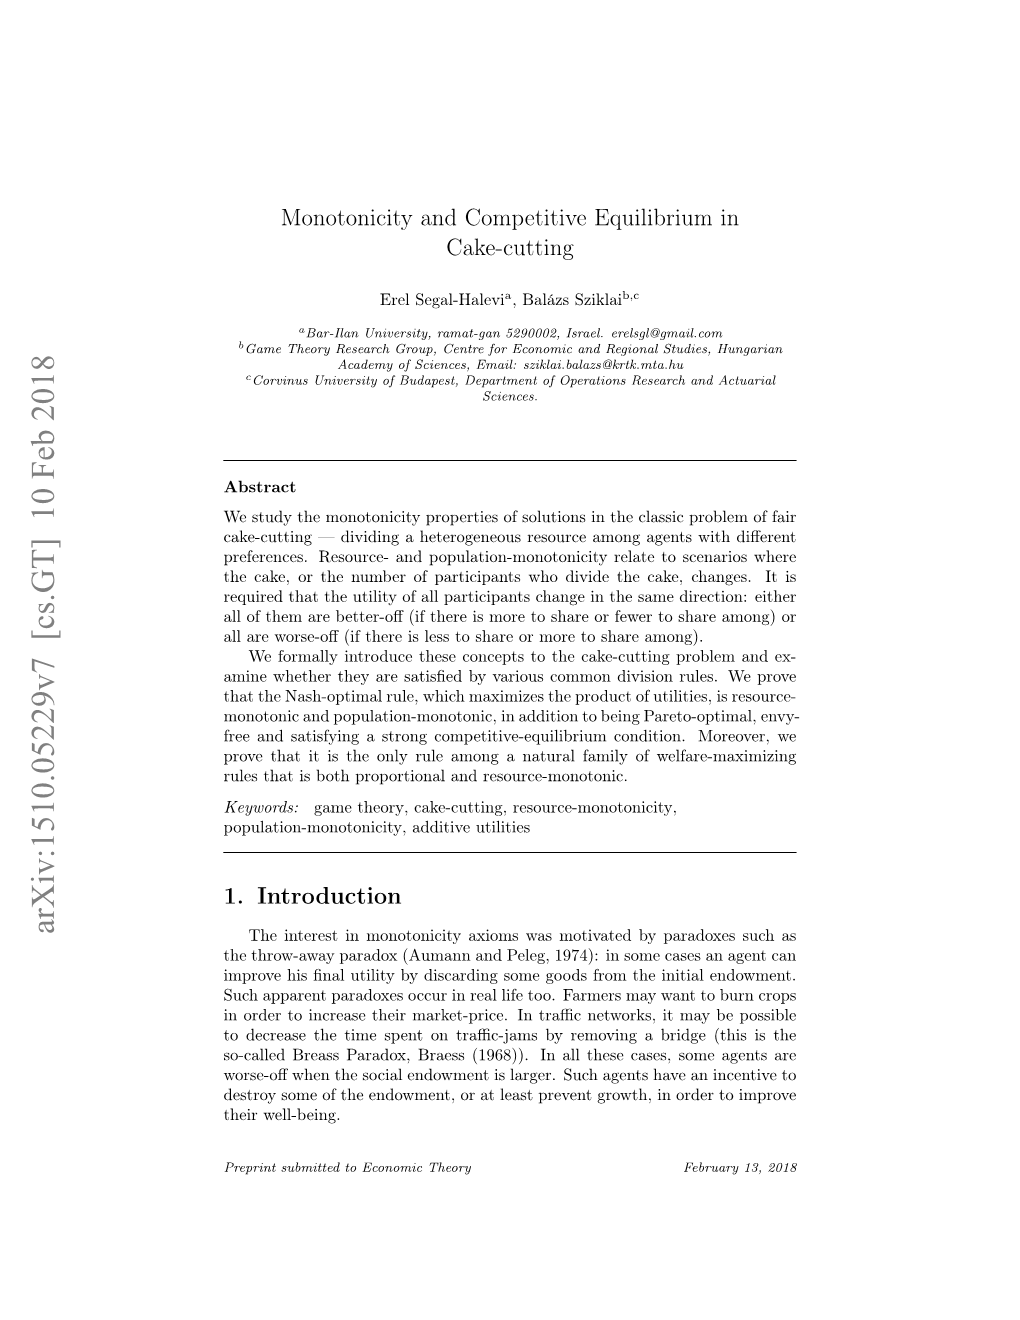 Monotonicity and Competitive Equilibrium in Cake-Cutting